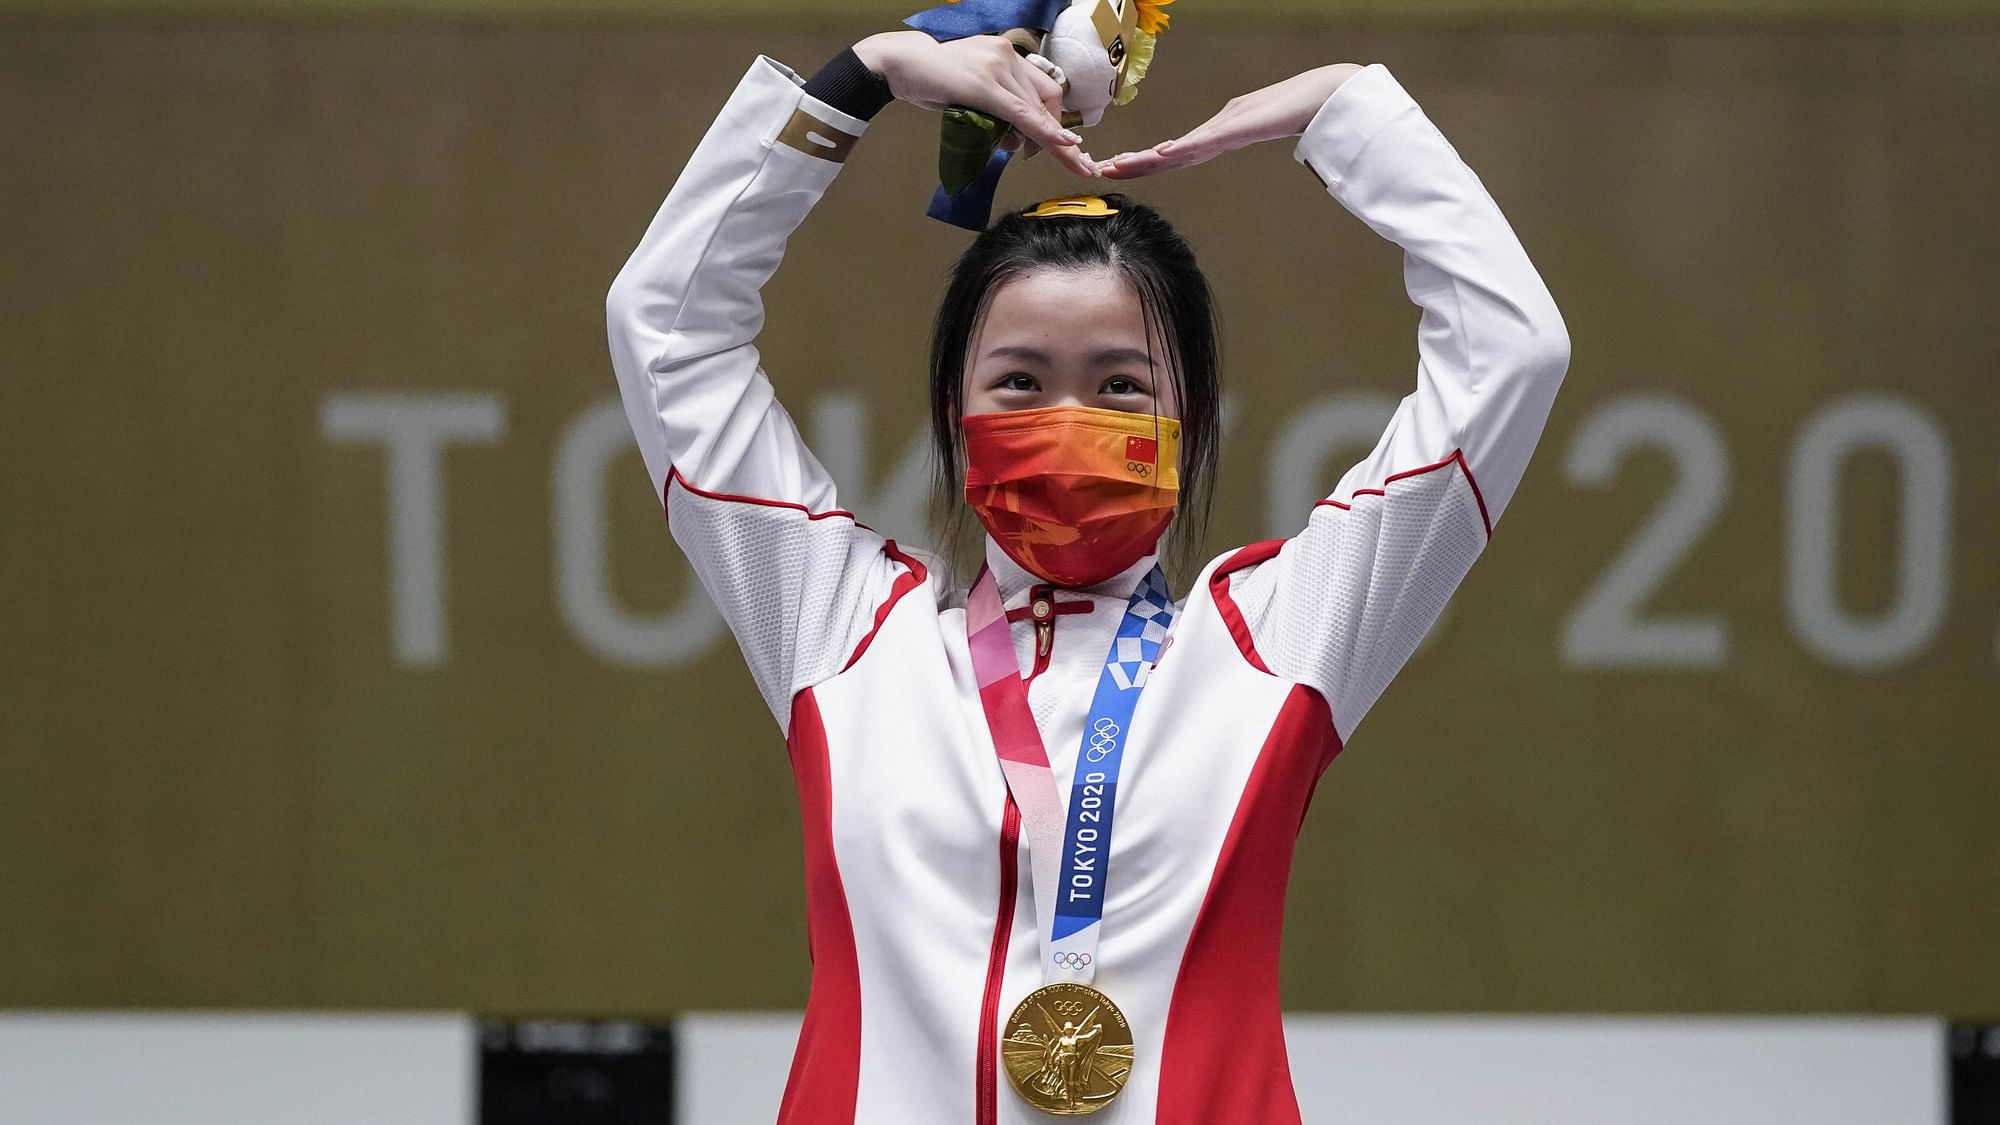 <div class="paragraphs"><p>Qian Yang, of China reacts after winning the gold medal in the women's 10-meter air rifle at the Asaka Shooting Range in the 2020 Summer Olympics.</p></div>